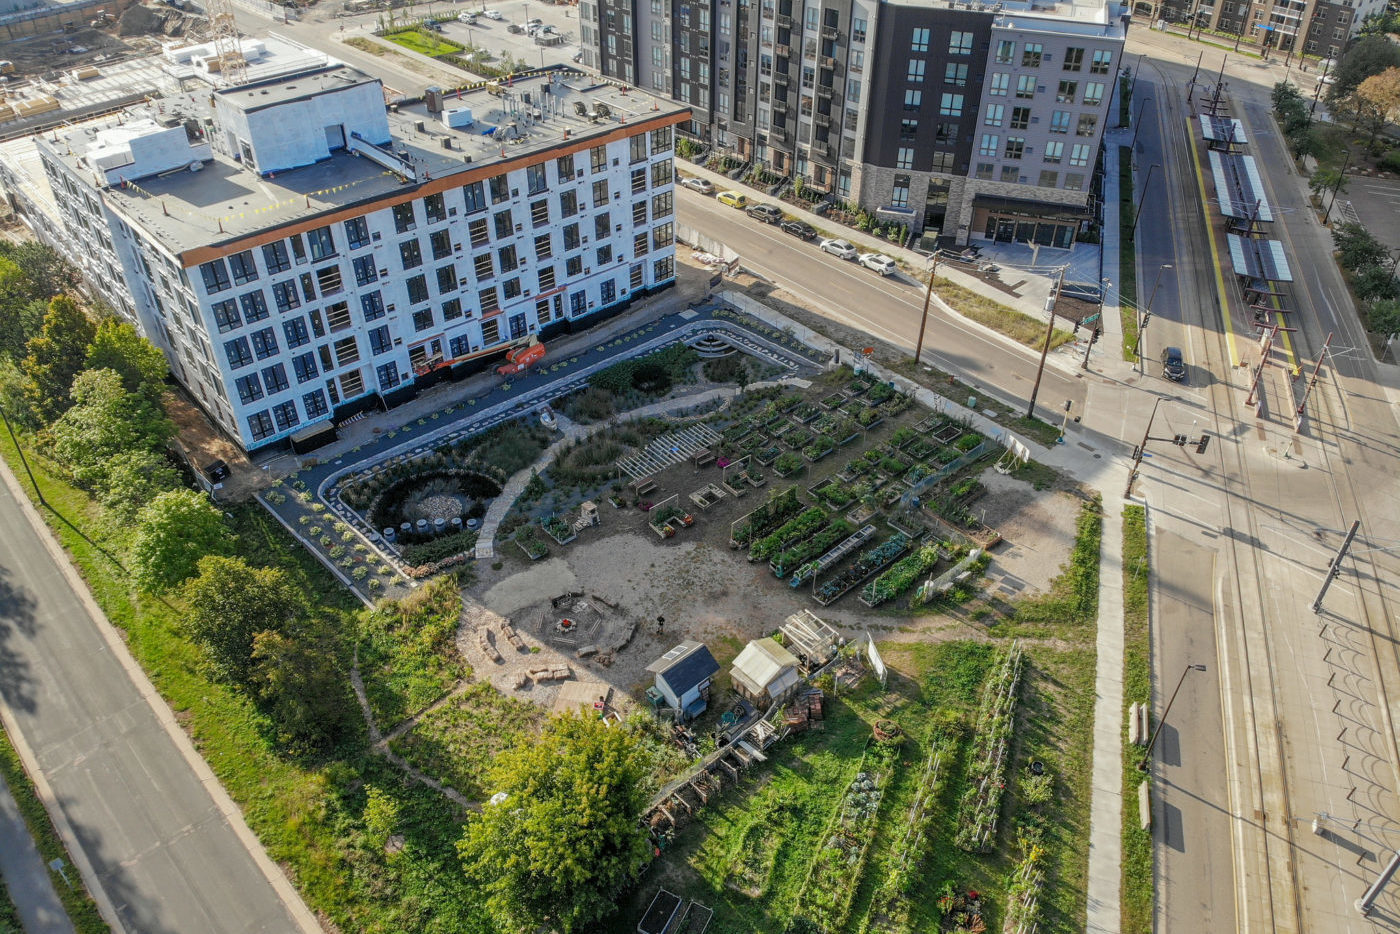 Towerside Park, Stormwater System & Green 4th